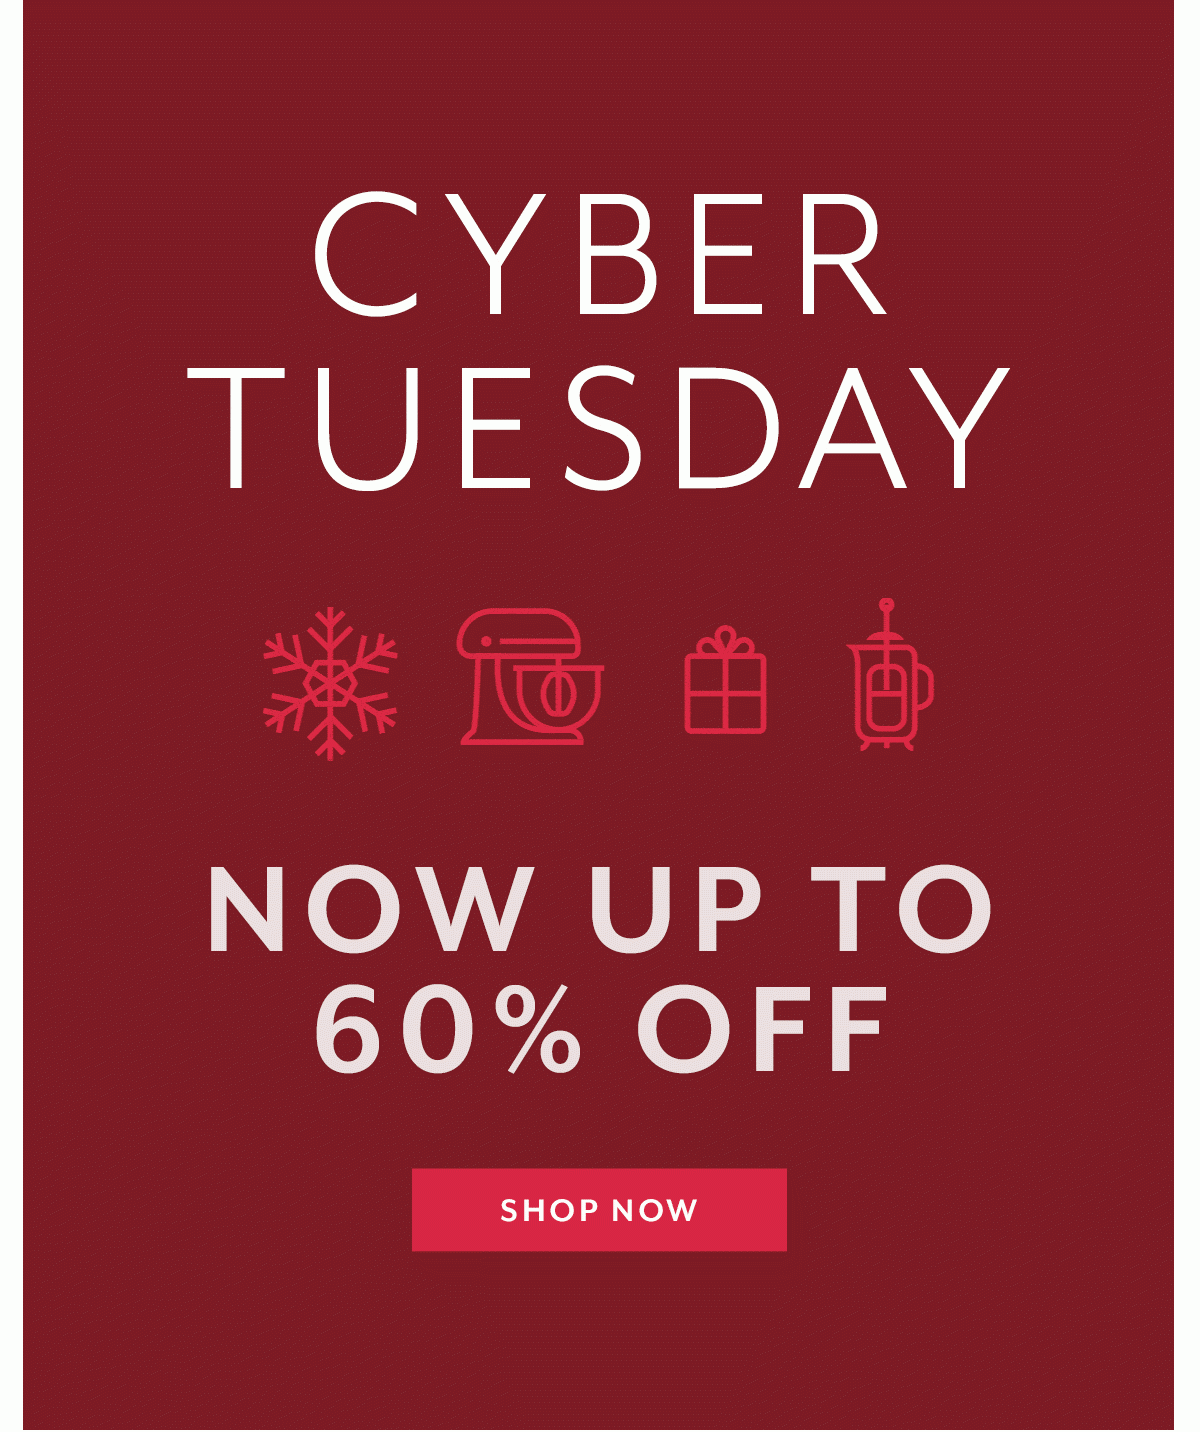 CYBER TUESDAY